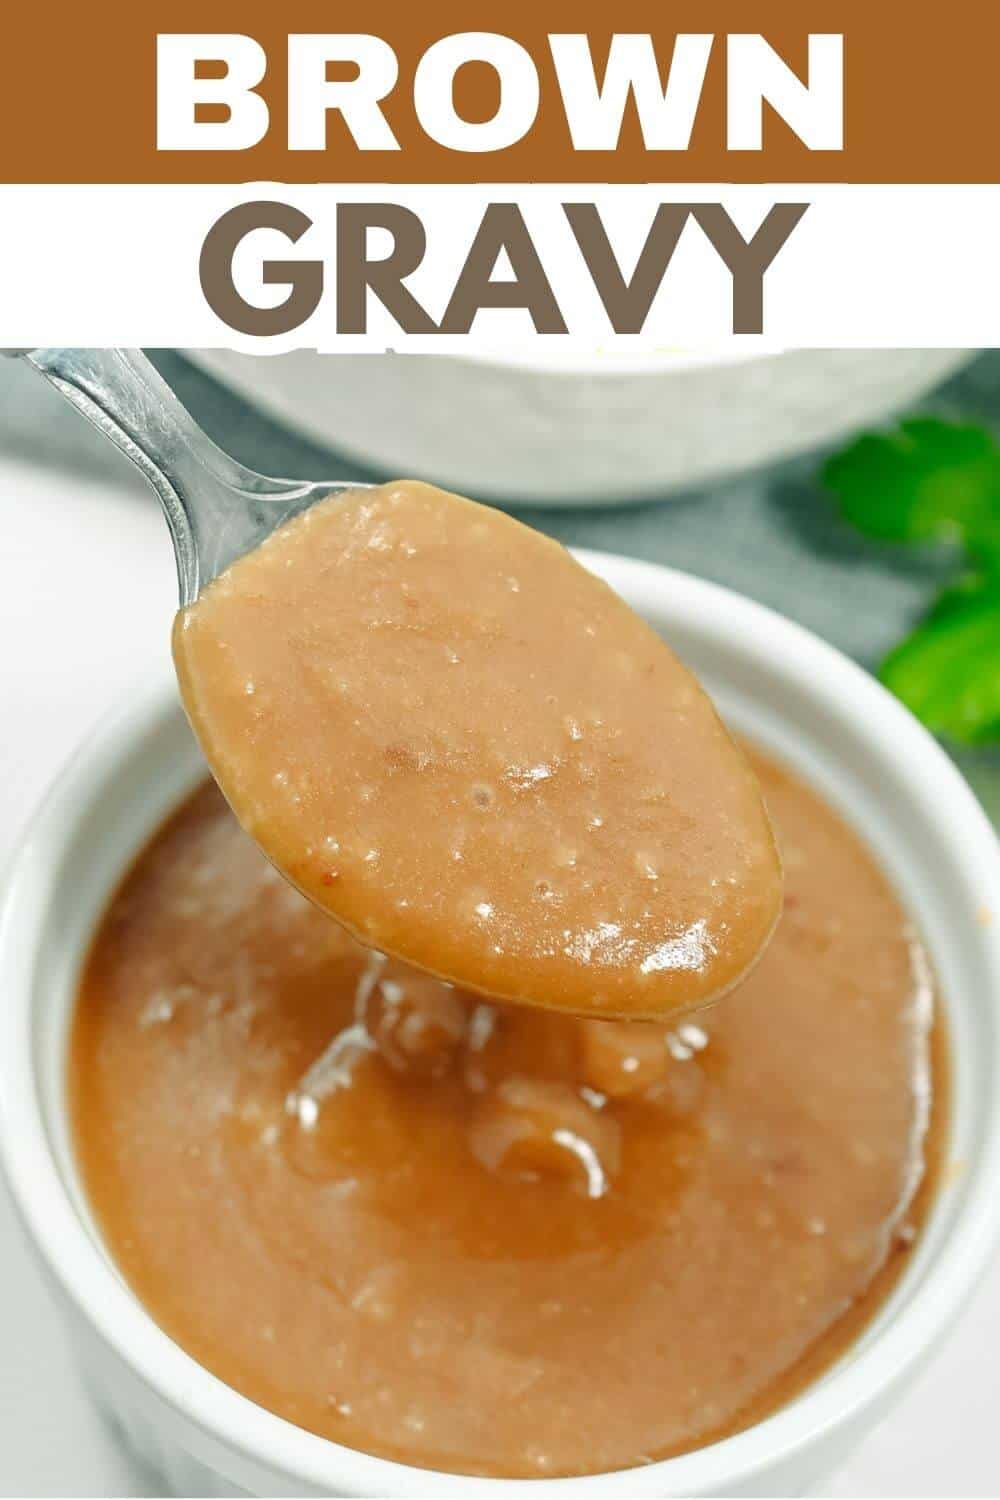 A bowl of brown gravy, accompanied by a spoon.